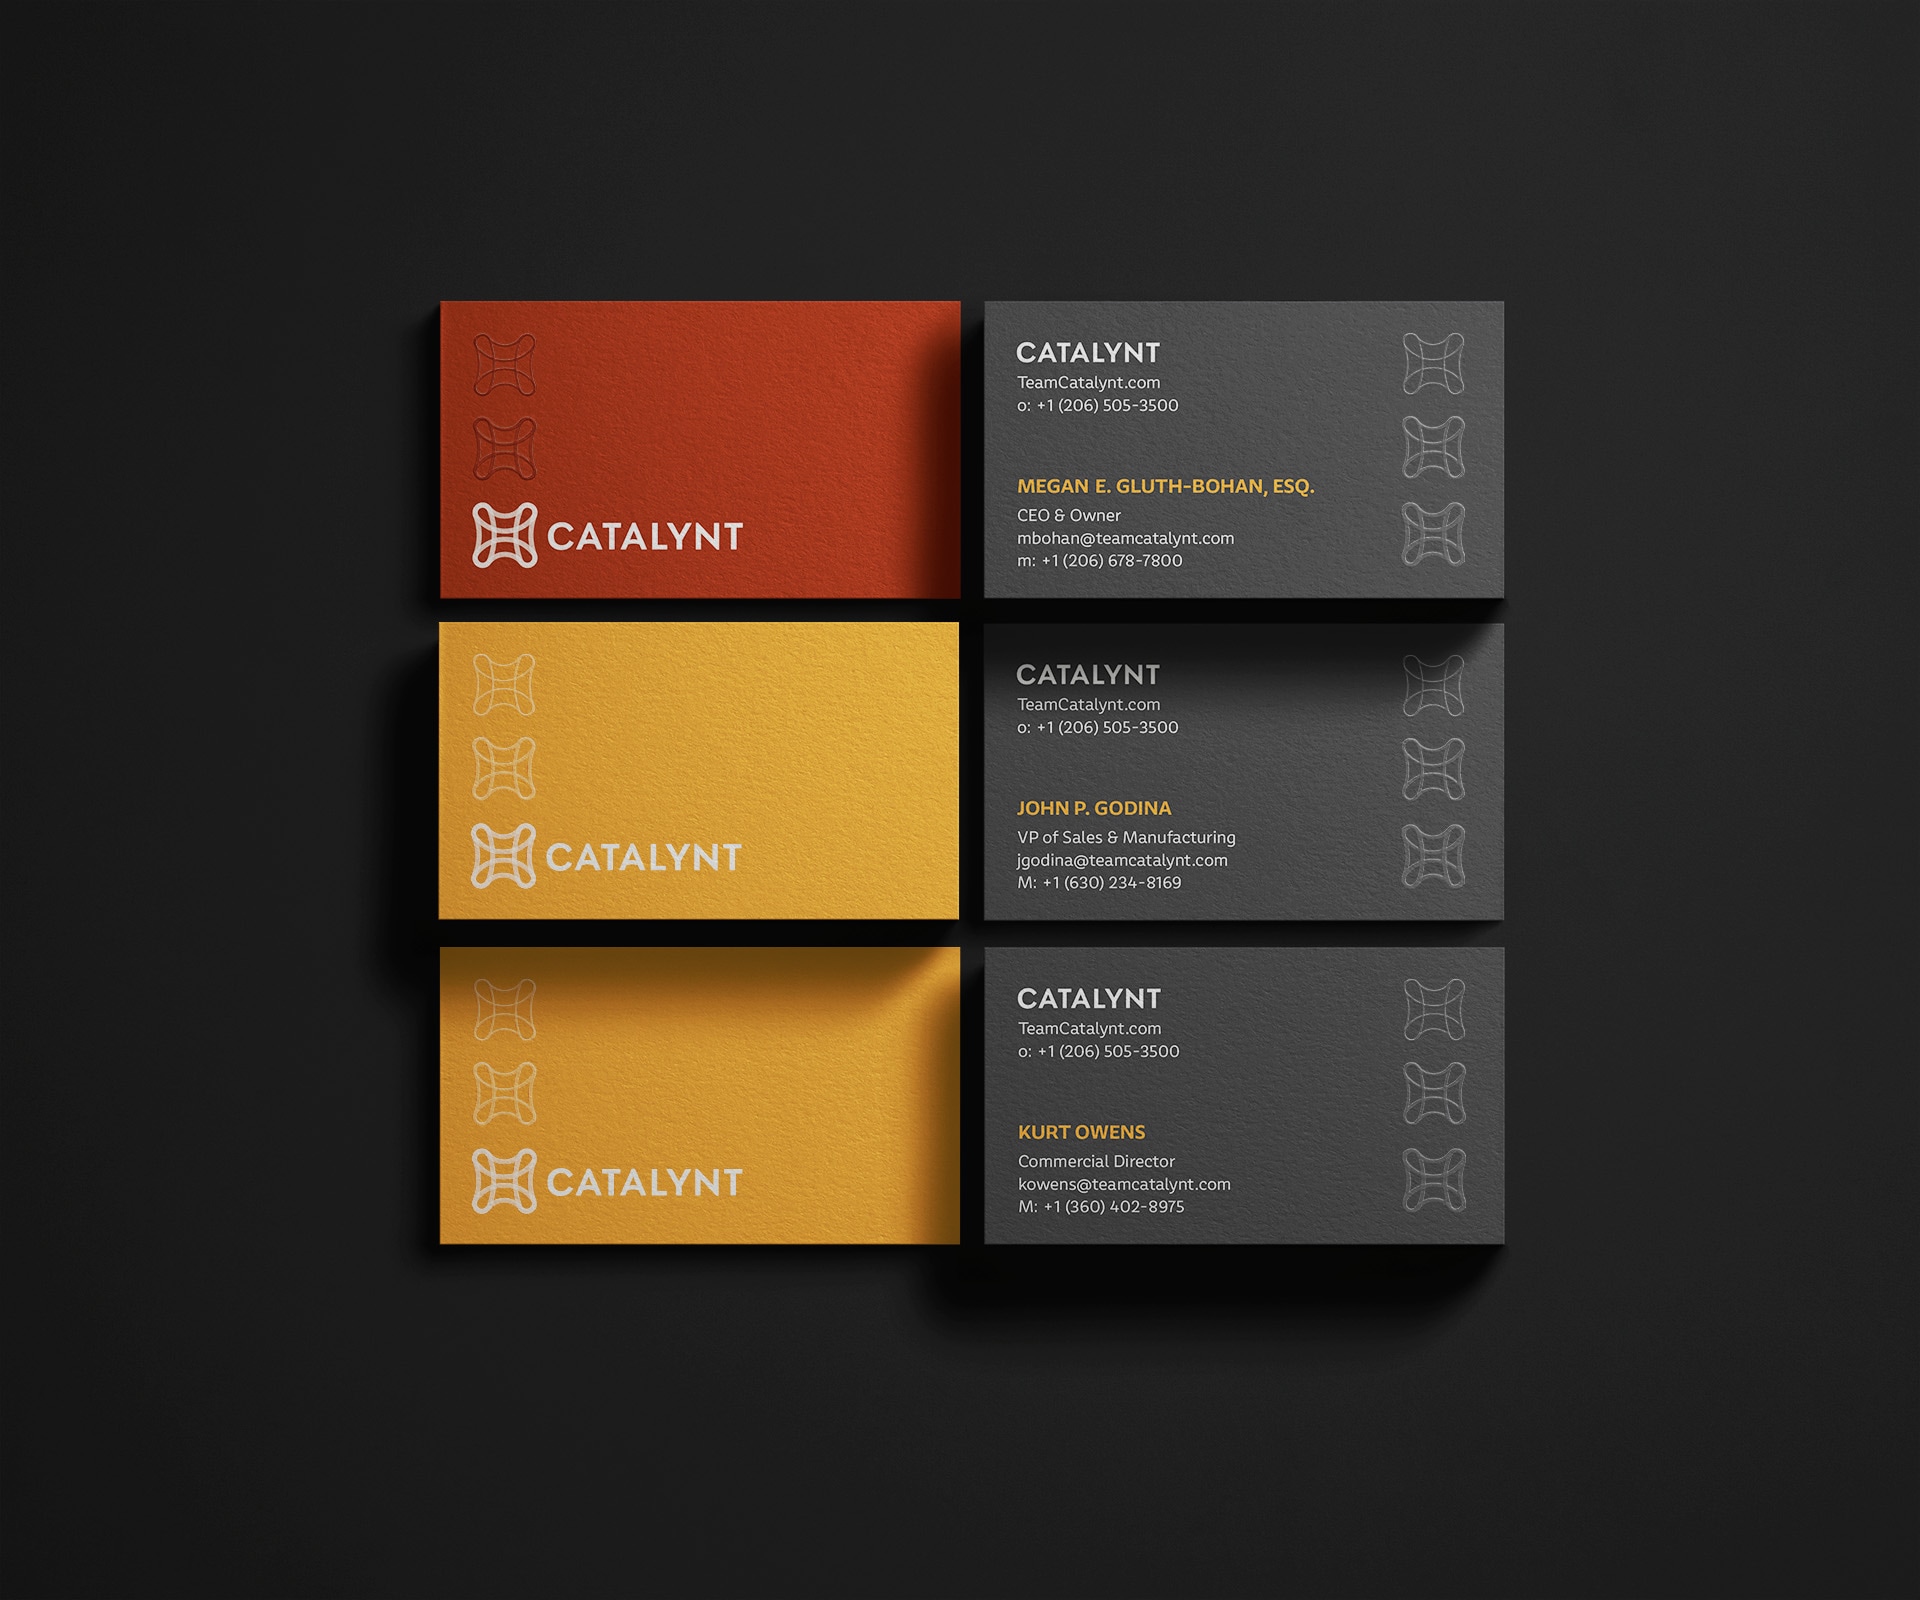 Catalynt business cards